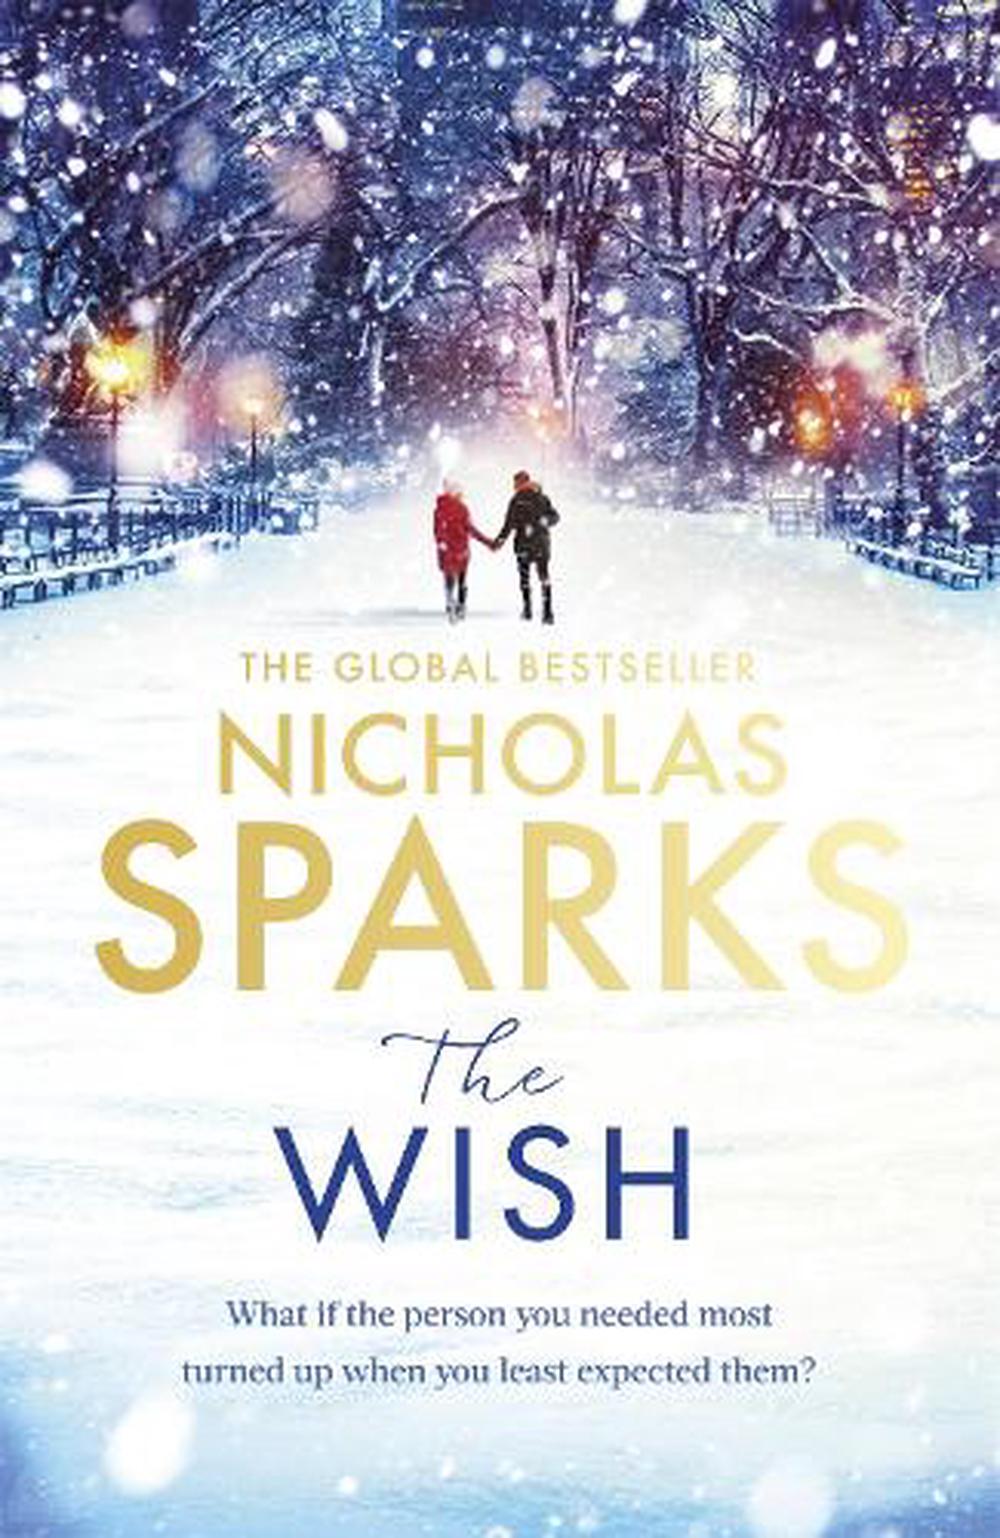 The Wish by Nicholas Sparks, Hardcover, 9780751567861 Buy online at The Nile